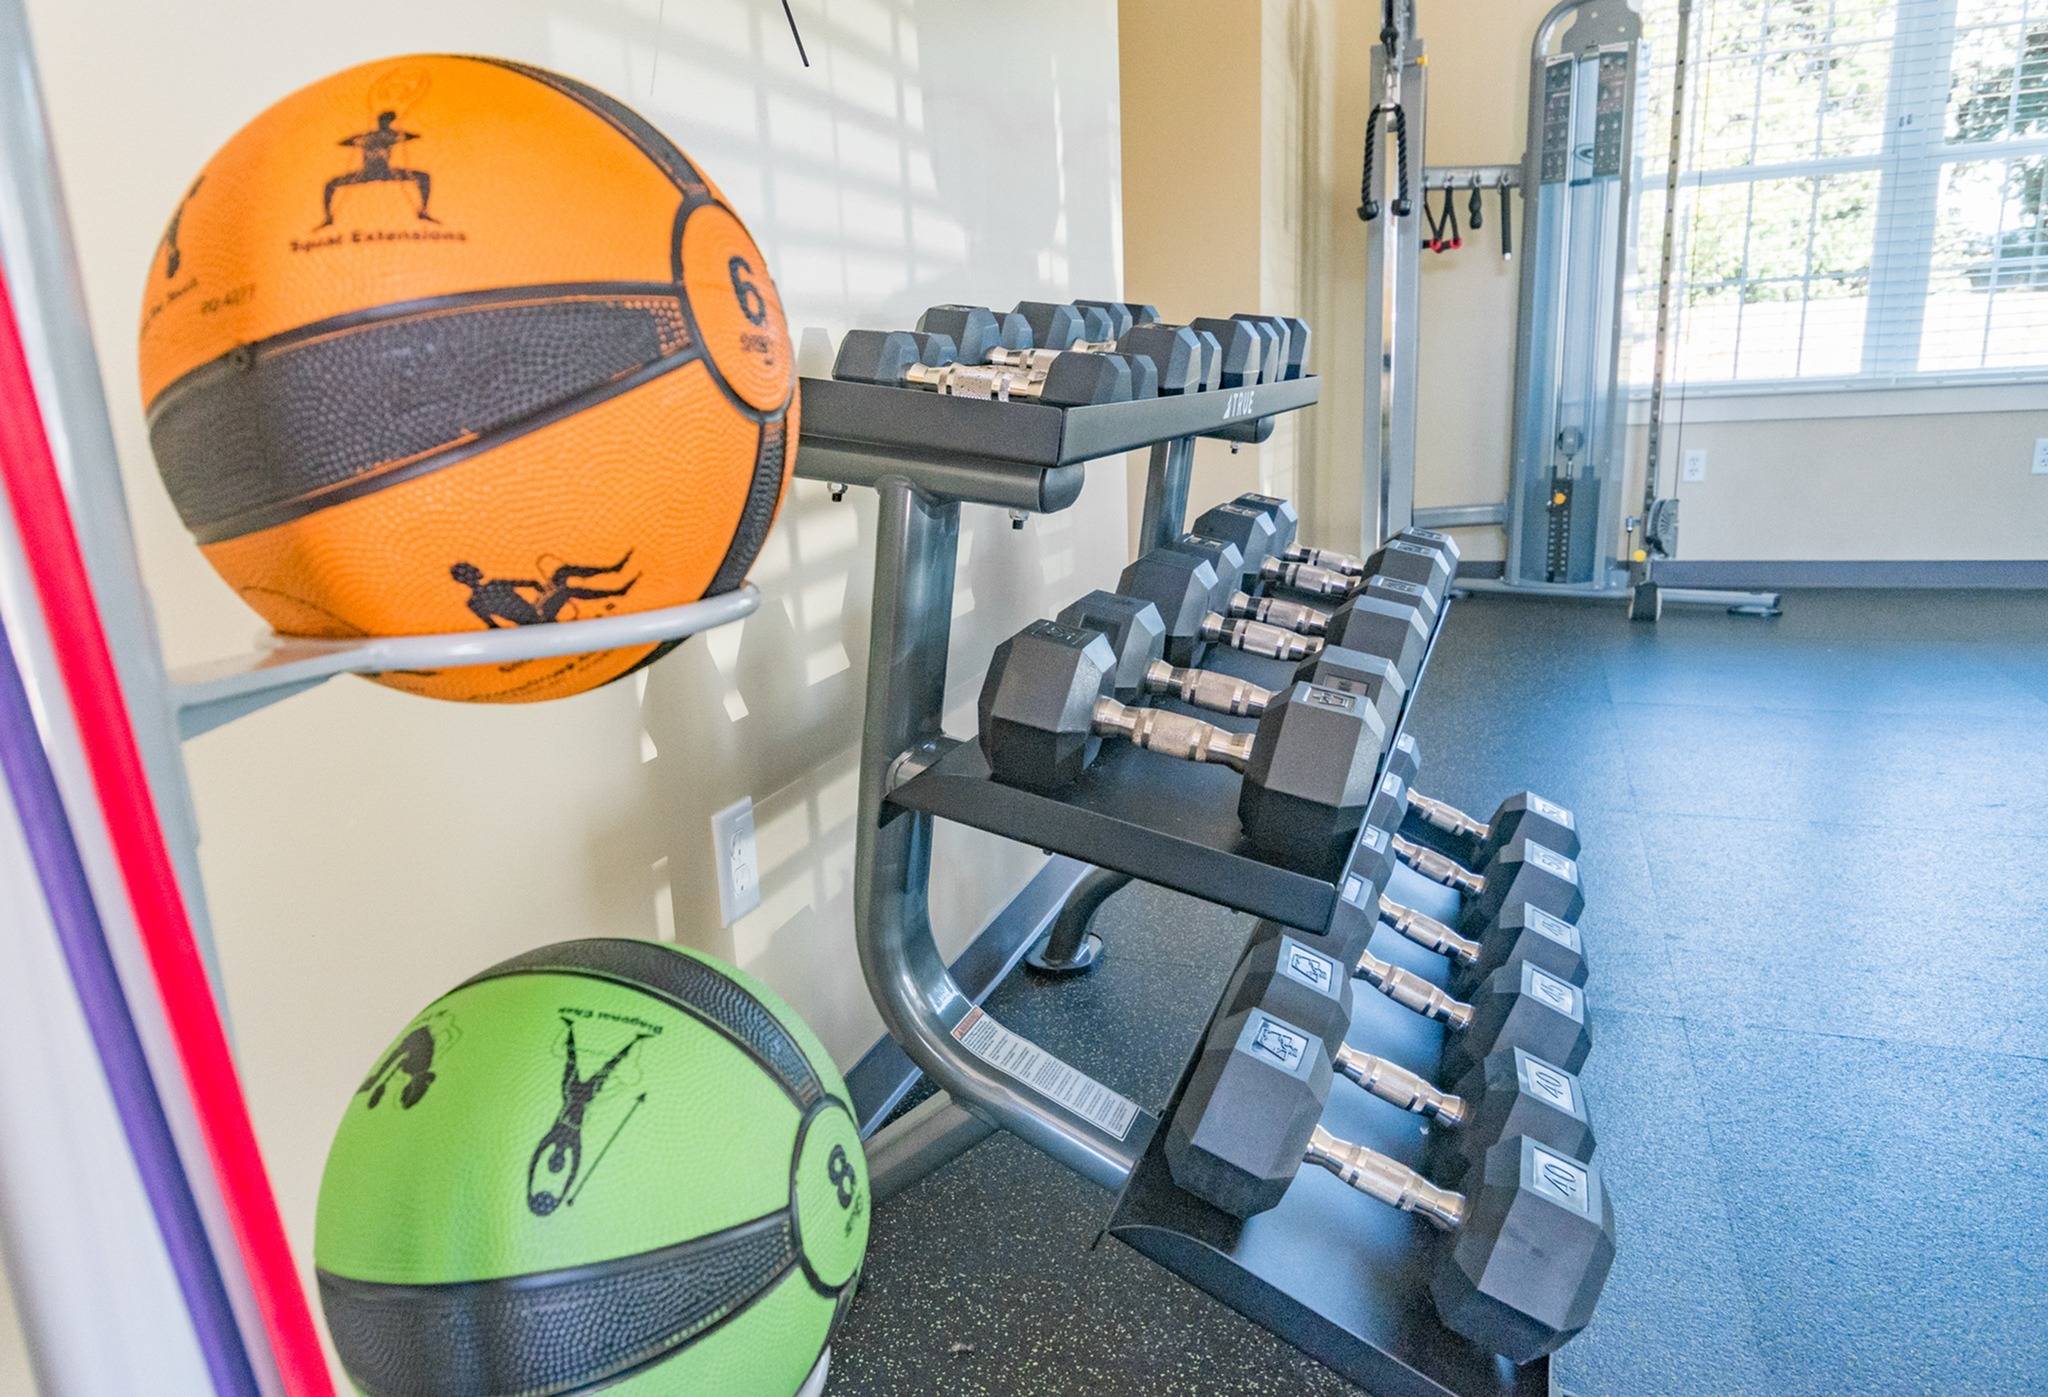 Woodland Plaza Apartments fitness center with exercise equipment